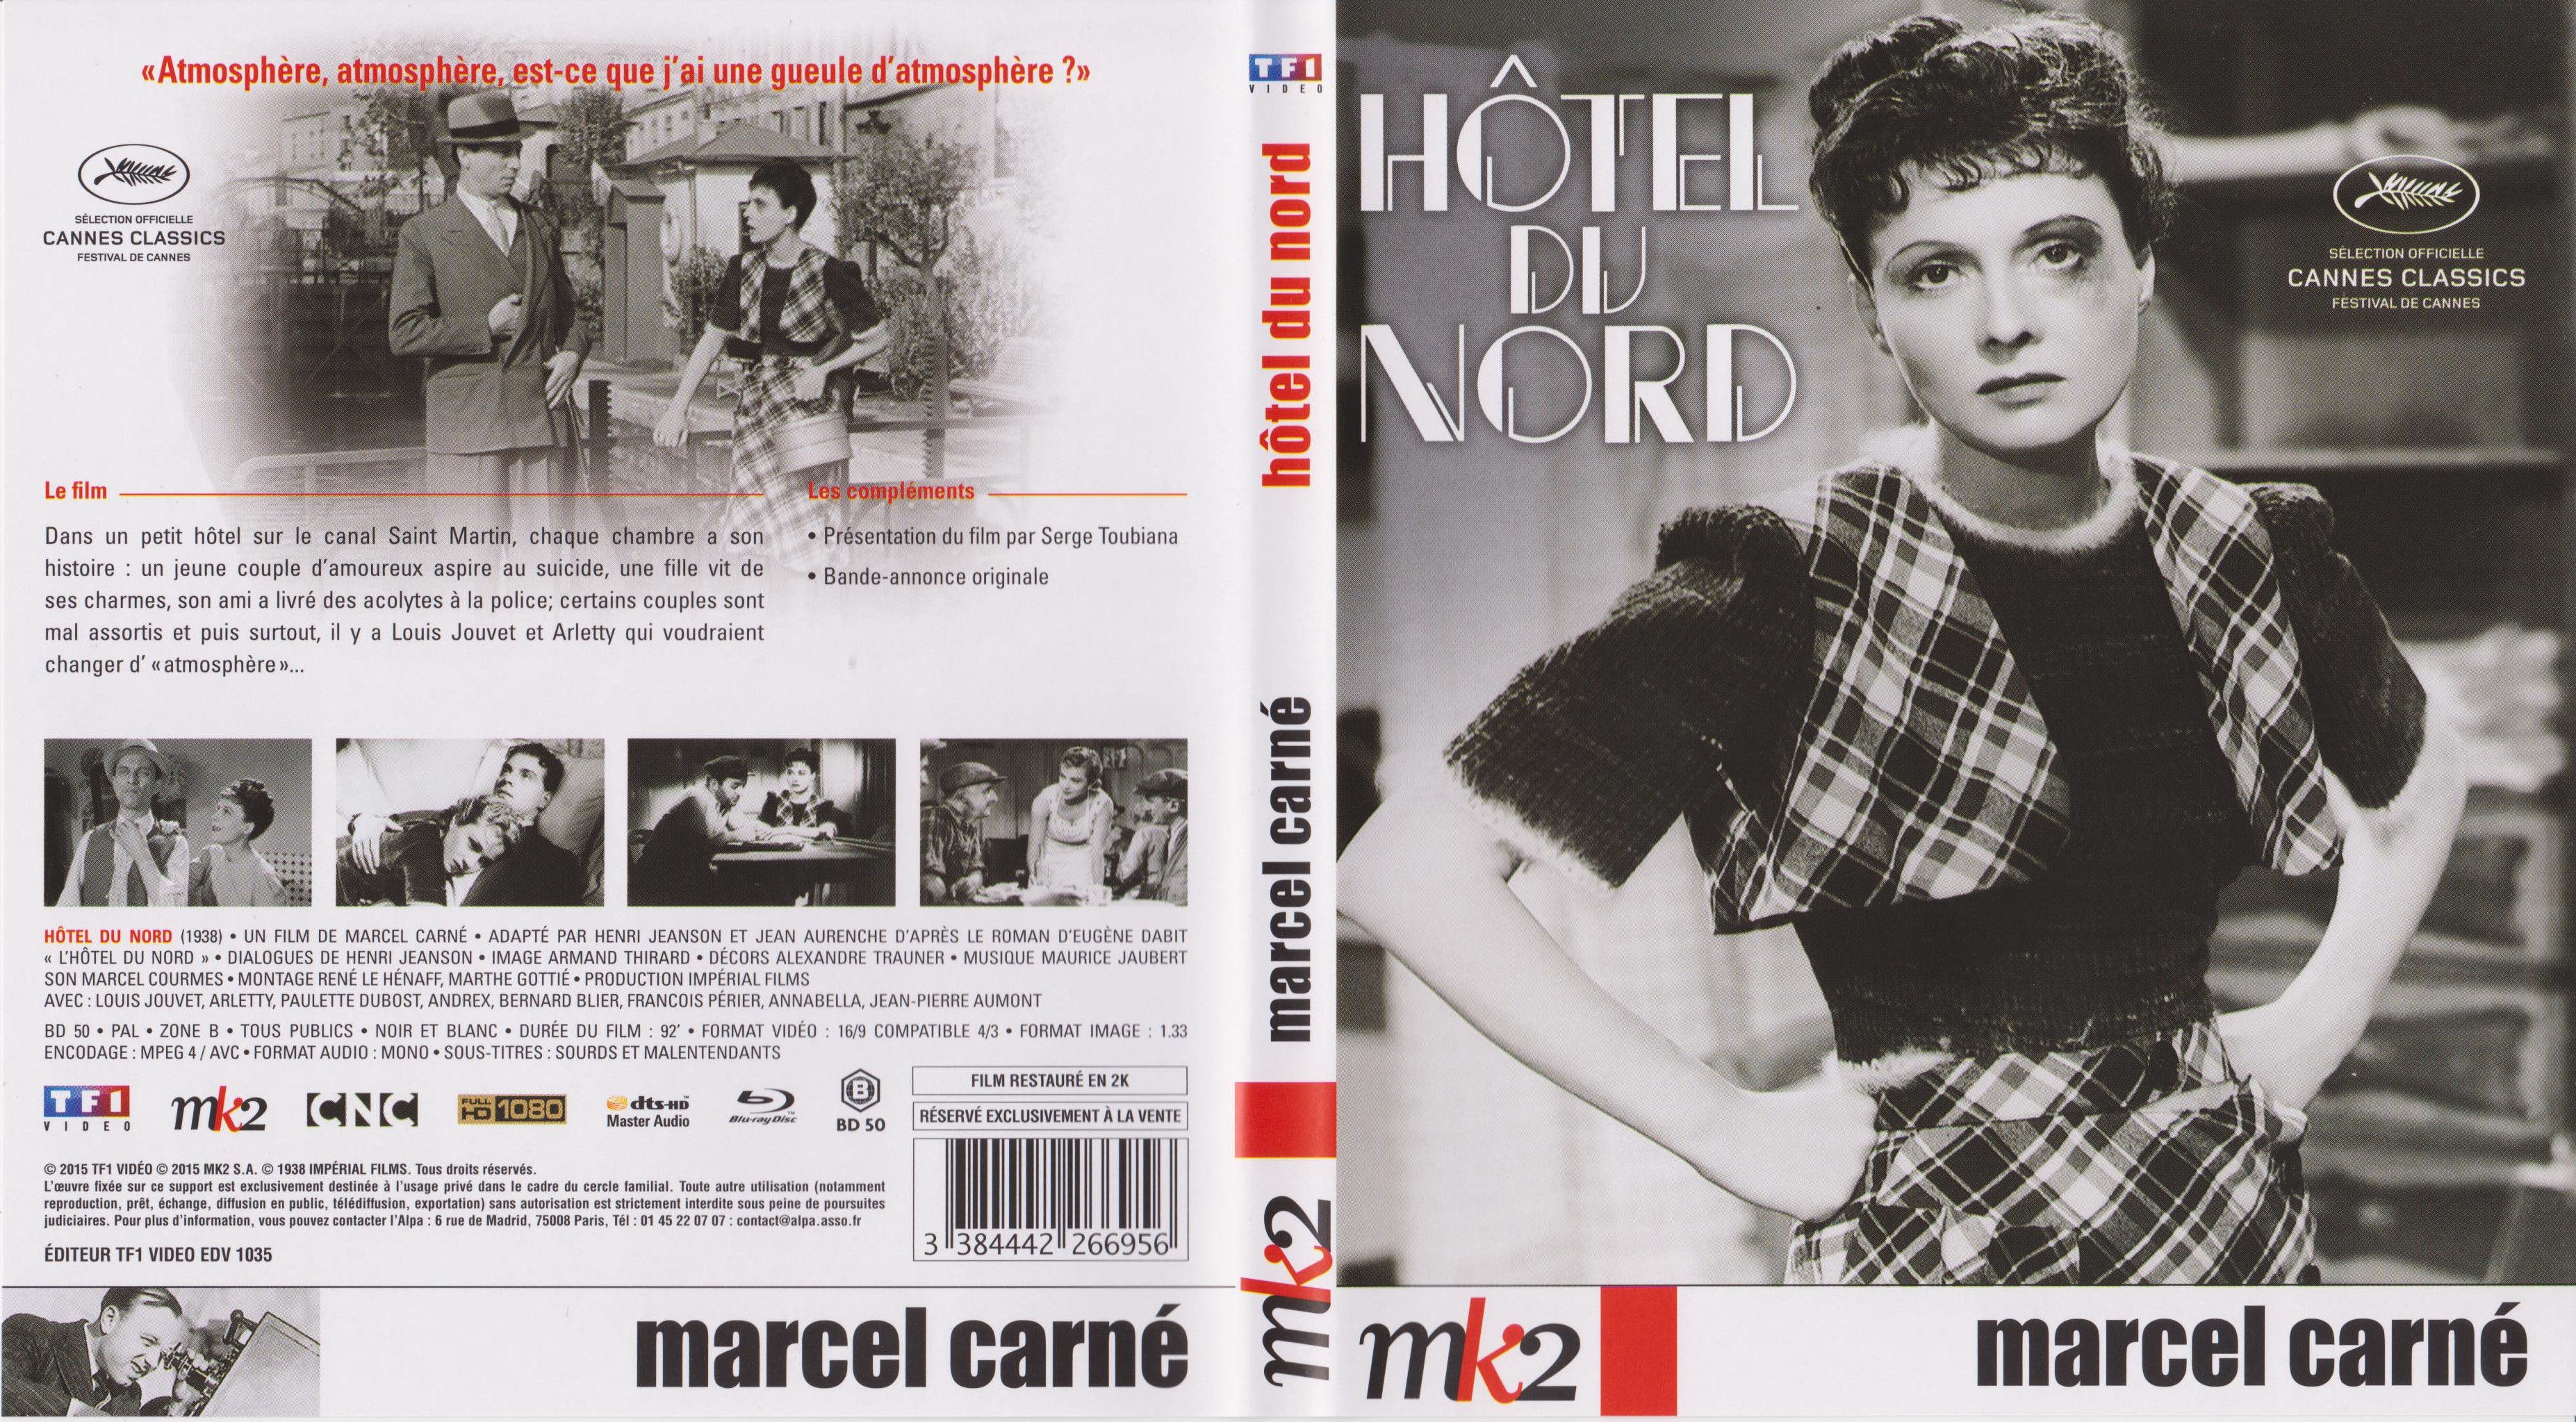 Jaquette DVD Hotel du Nord (BLU-RAY)